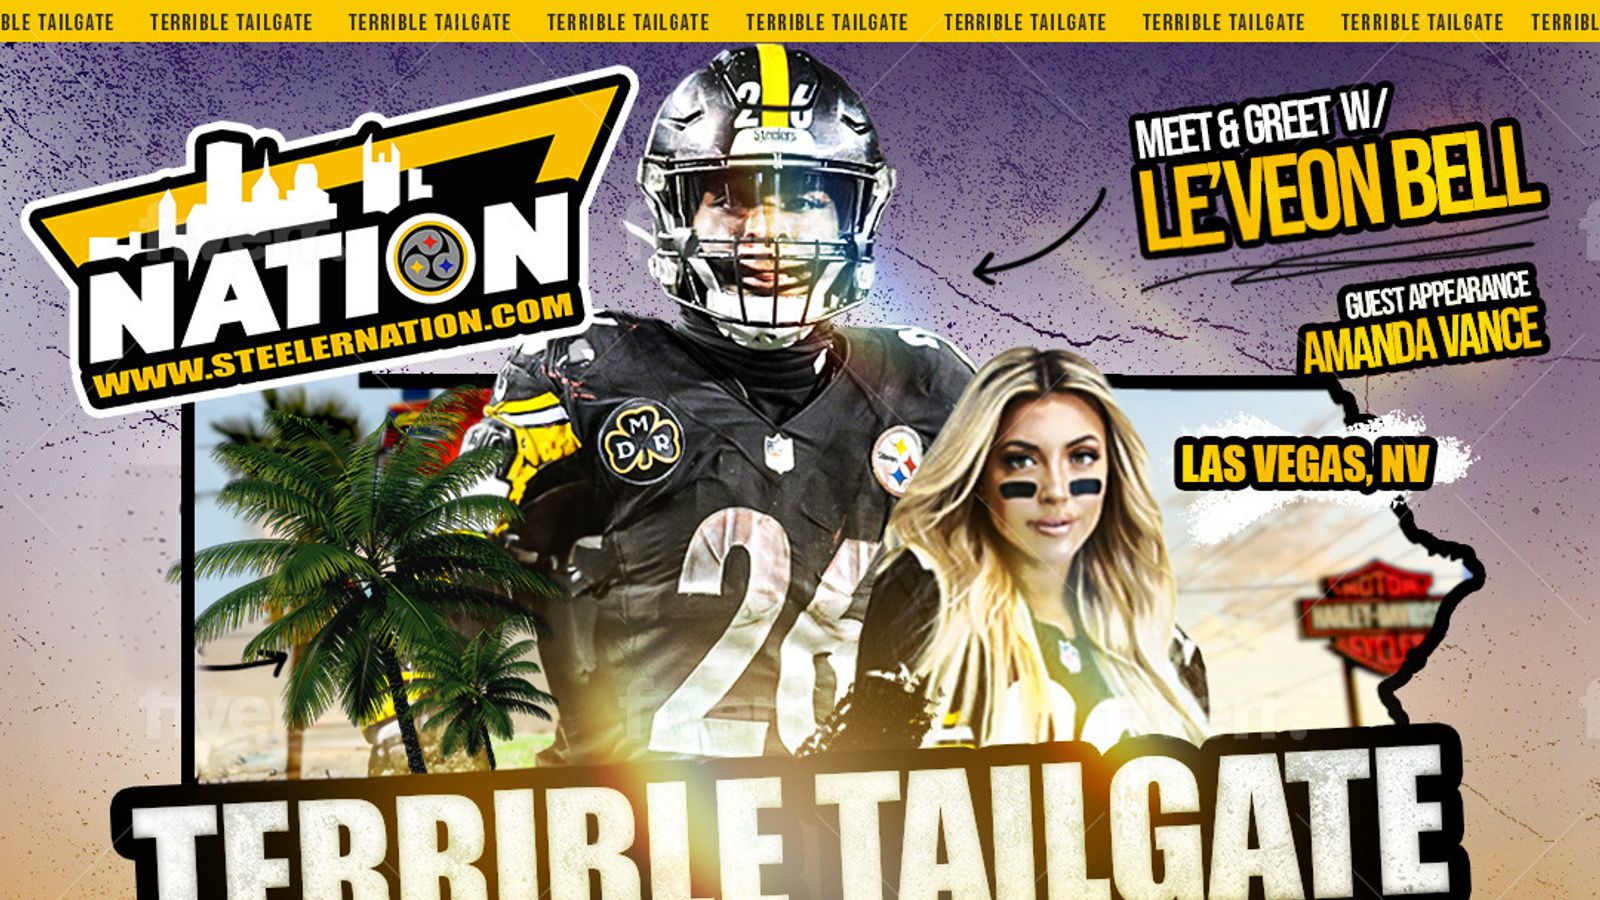 Steelers Fans Coming To Las Vegas! Absolutely Get To The Terrible Tailgate  For The Best Tailgate In LV!